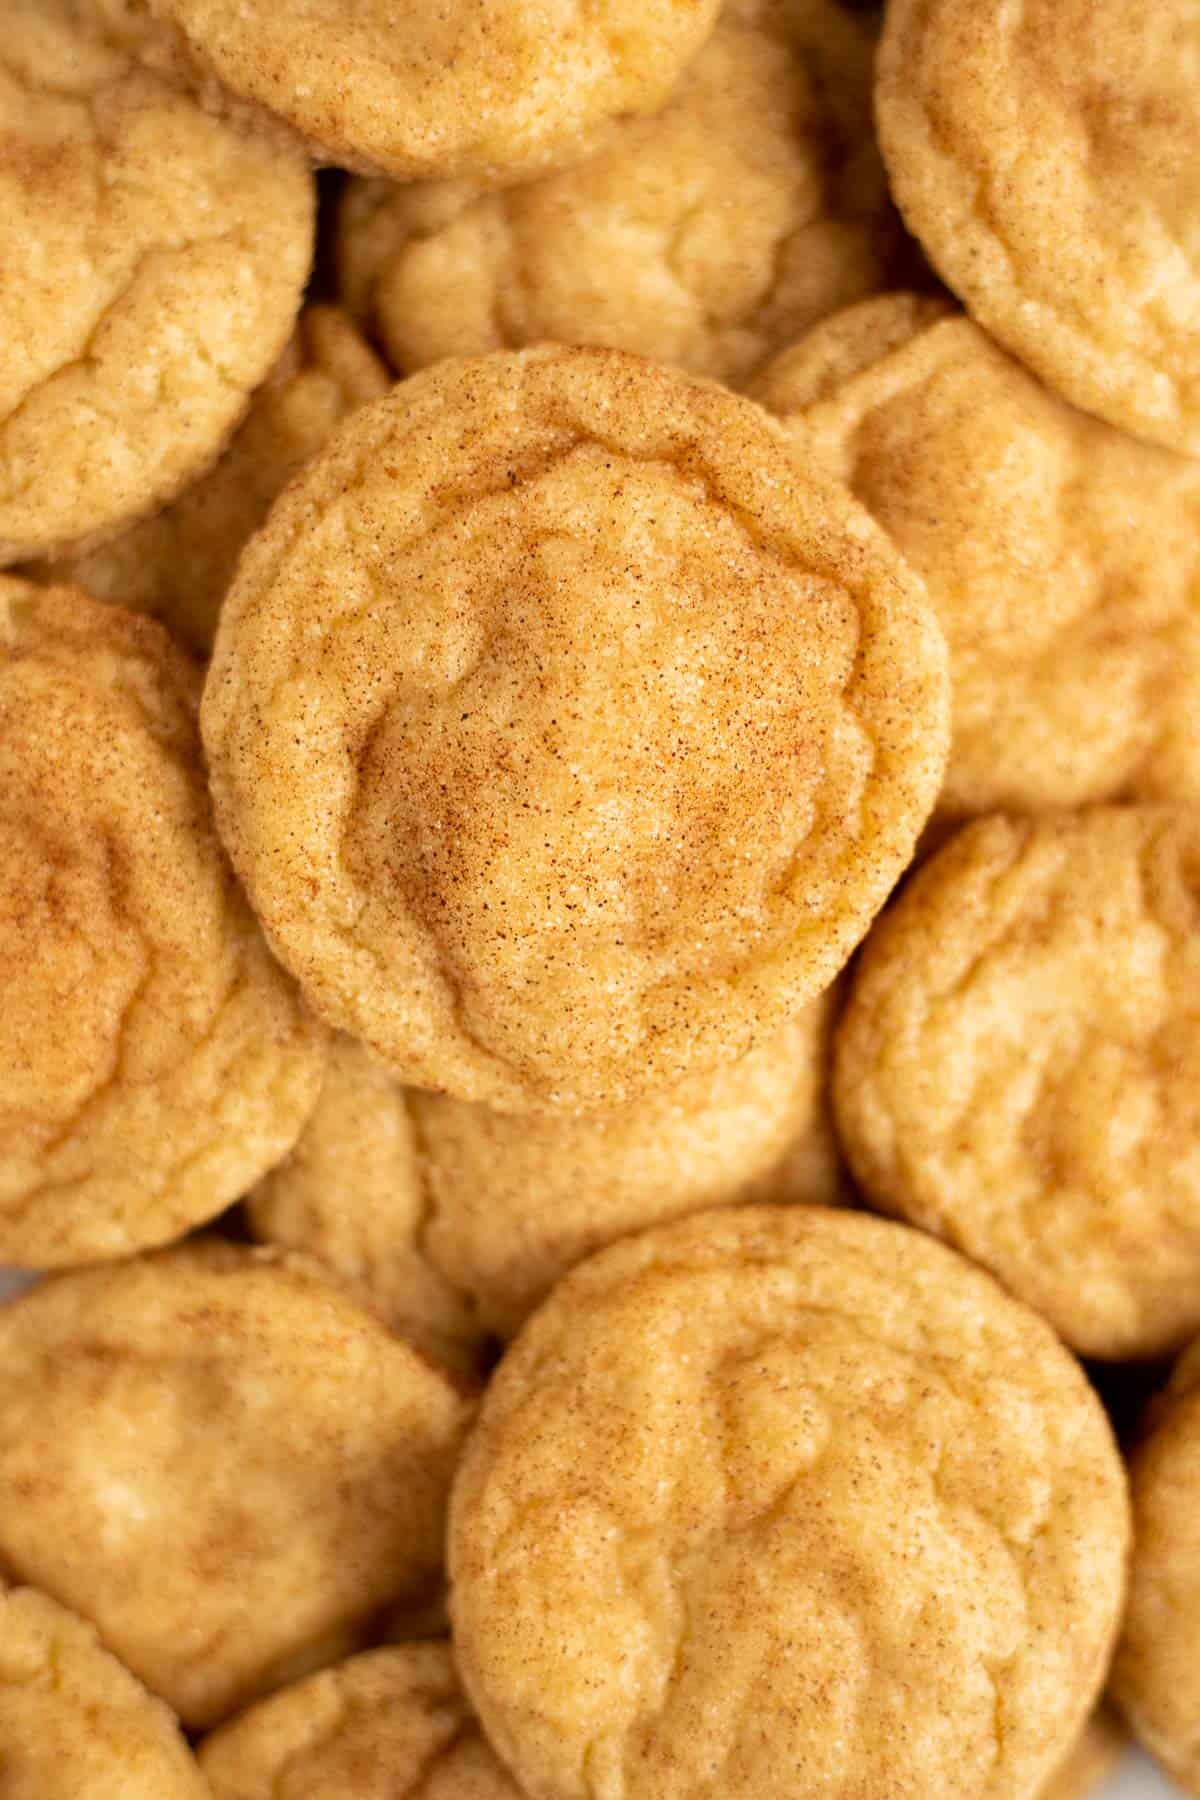 Snickerdoodles without Cream of Tartar piled on top of each other filling the entire frame.